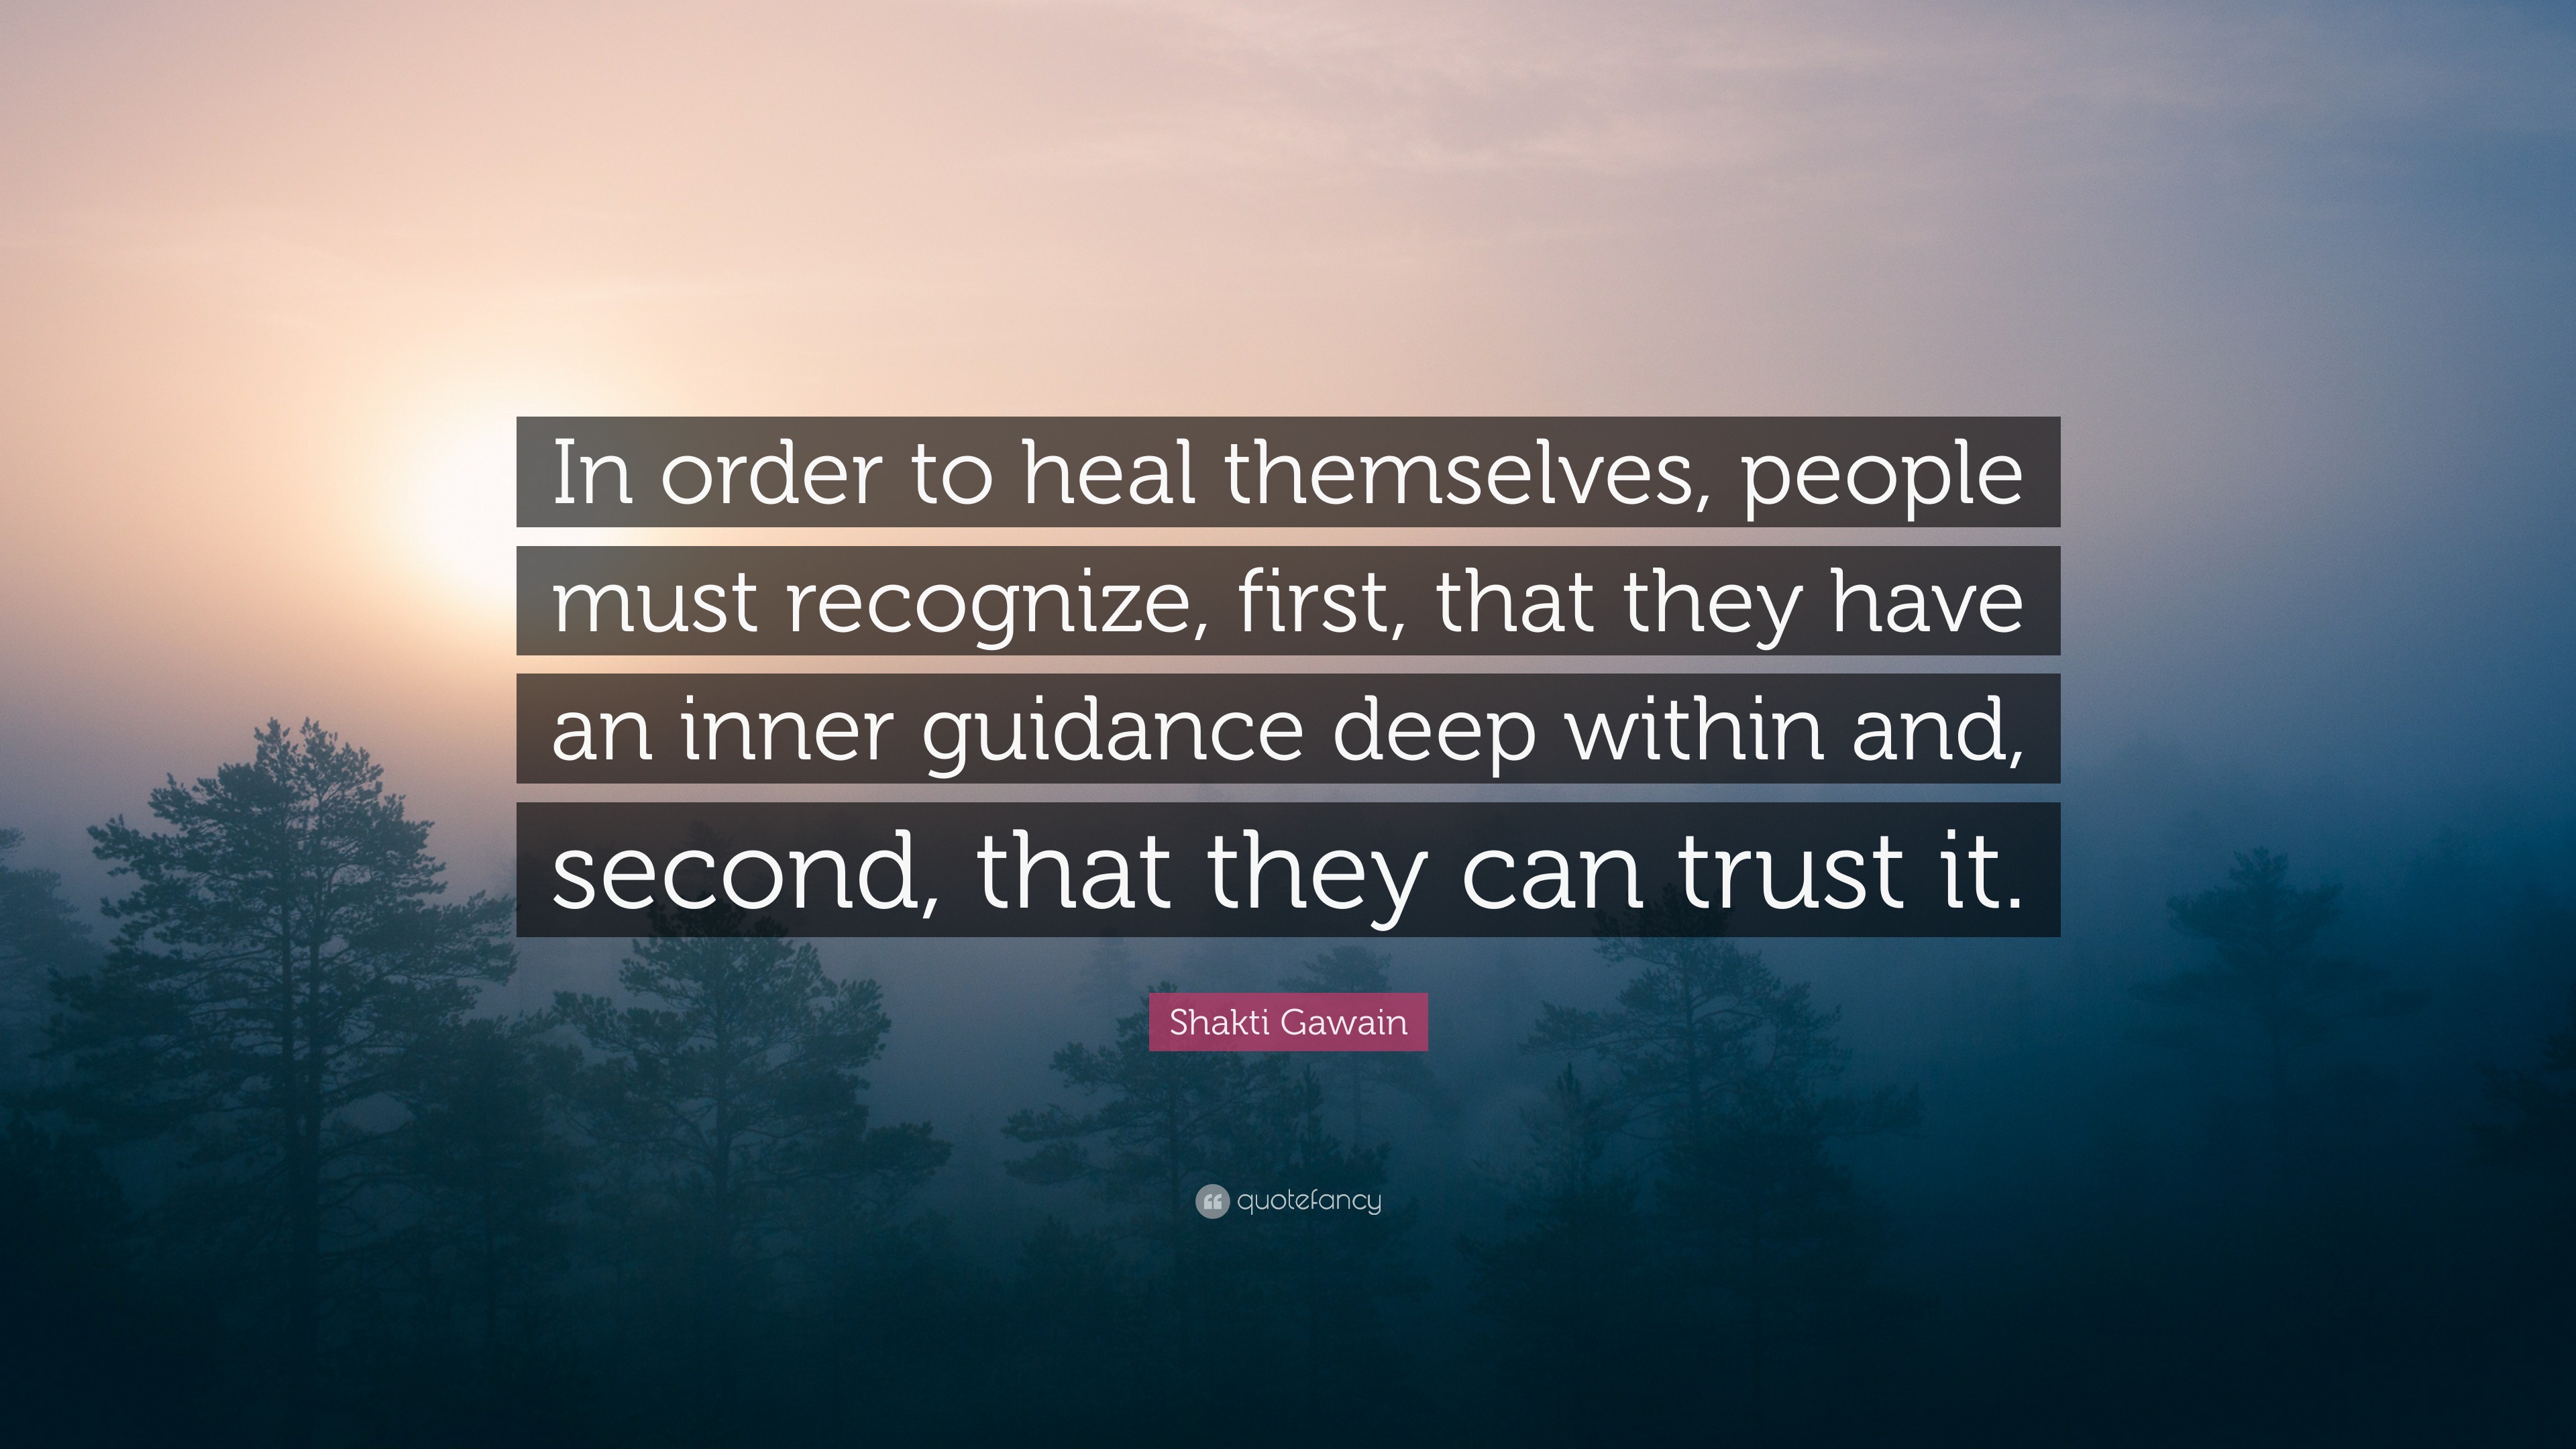 Shakti Gawain Quote: “In order to heal themselves, people must ...